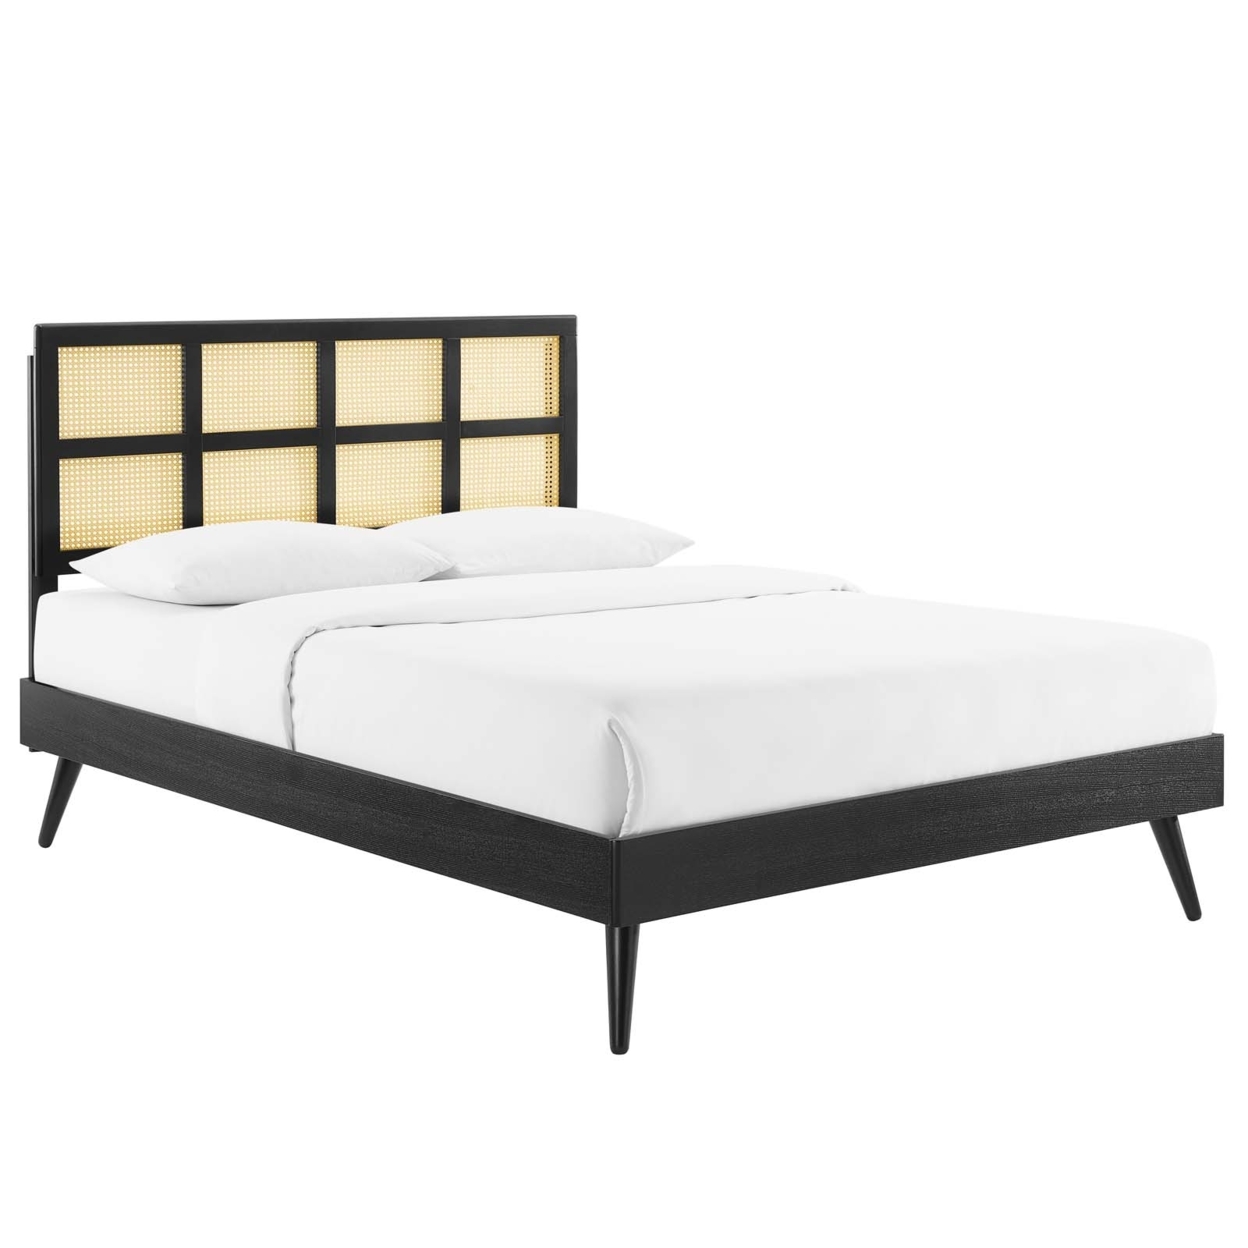 Sidney Cane And Wood King Platform Bed With Splayed Legs, Black